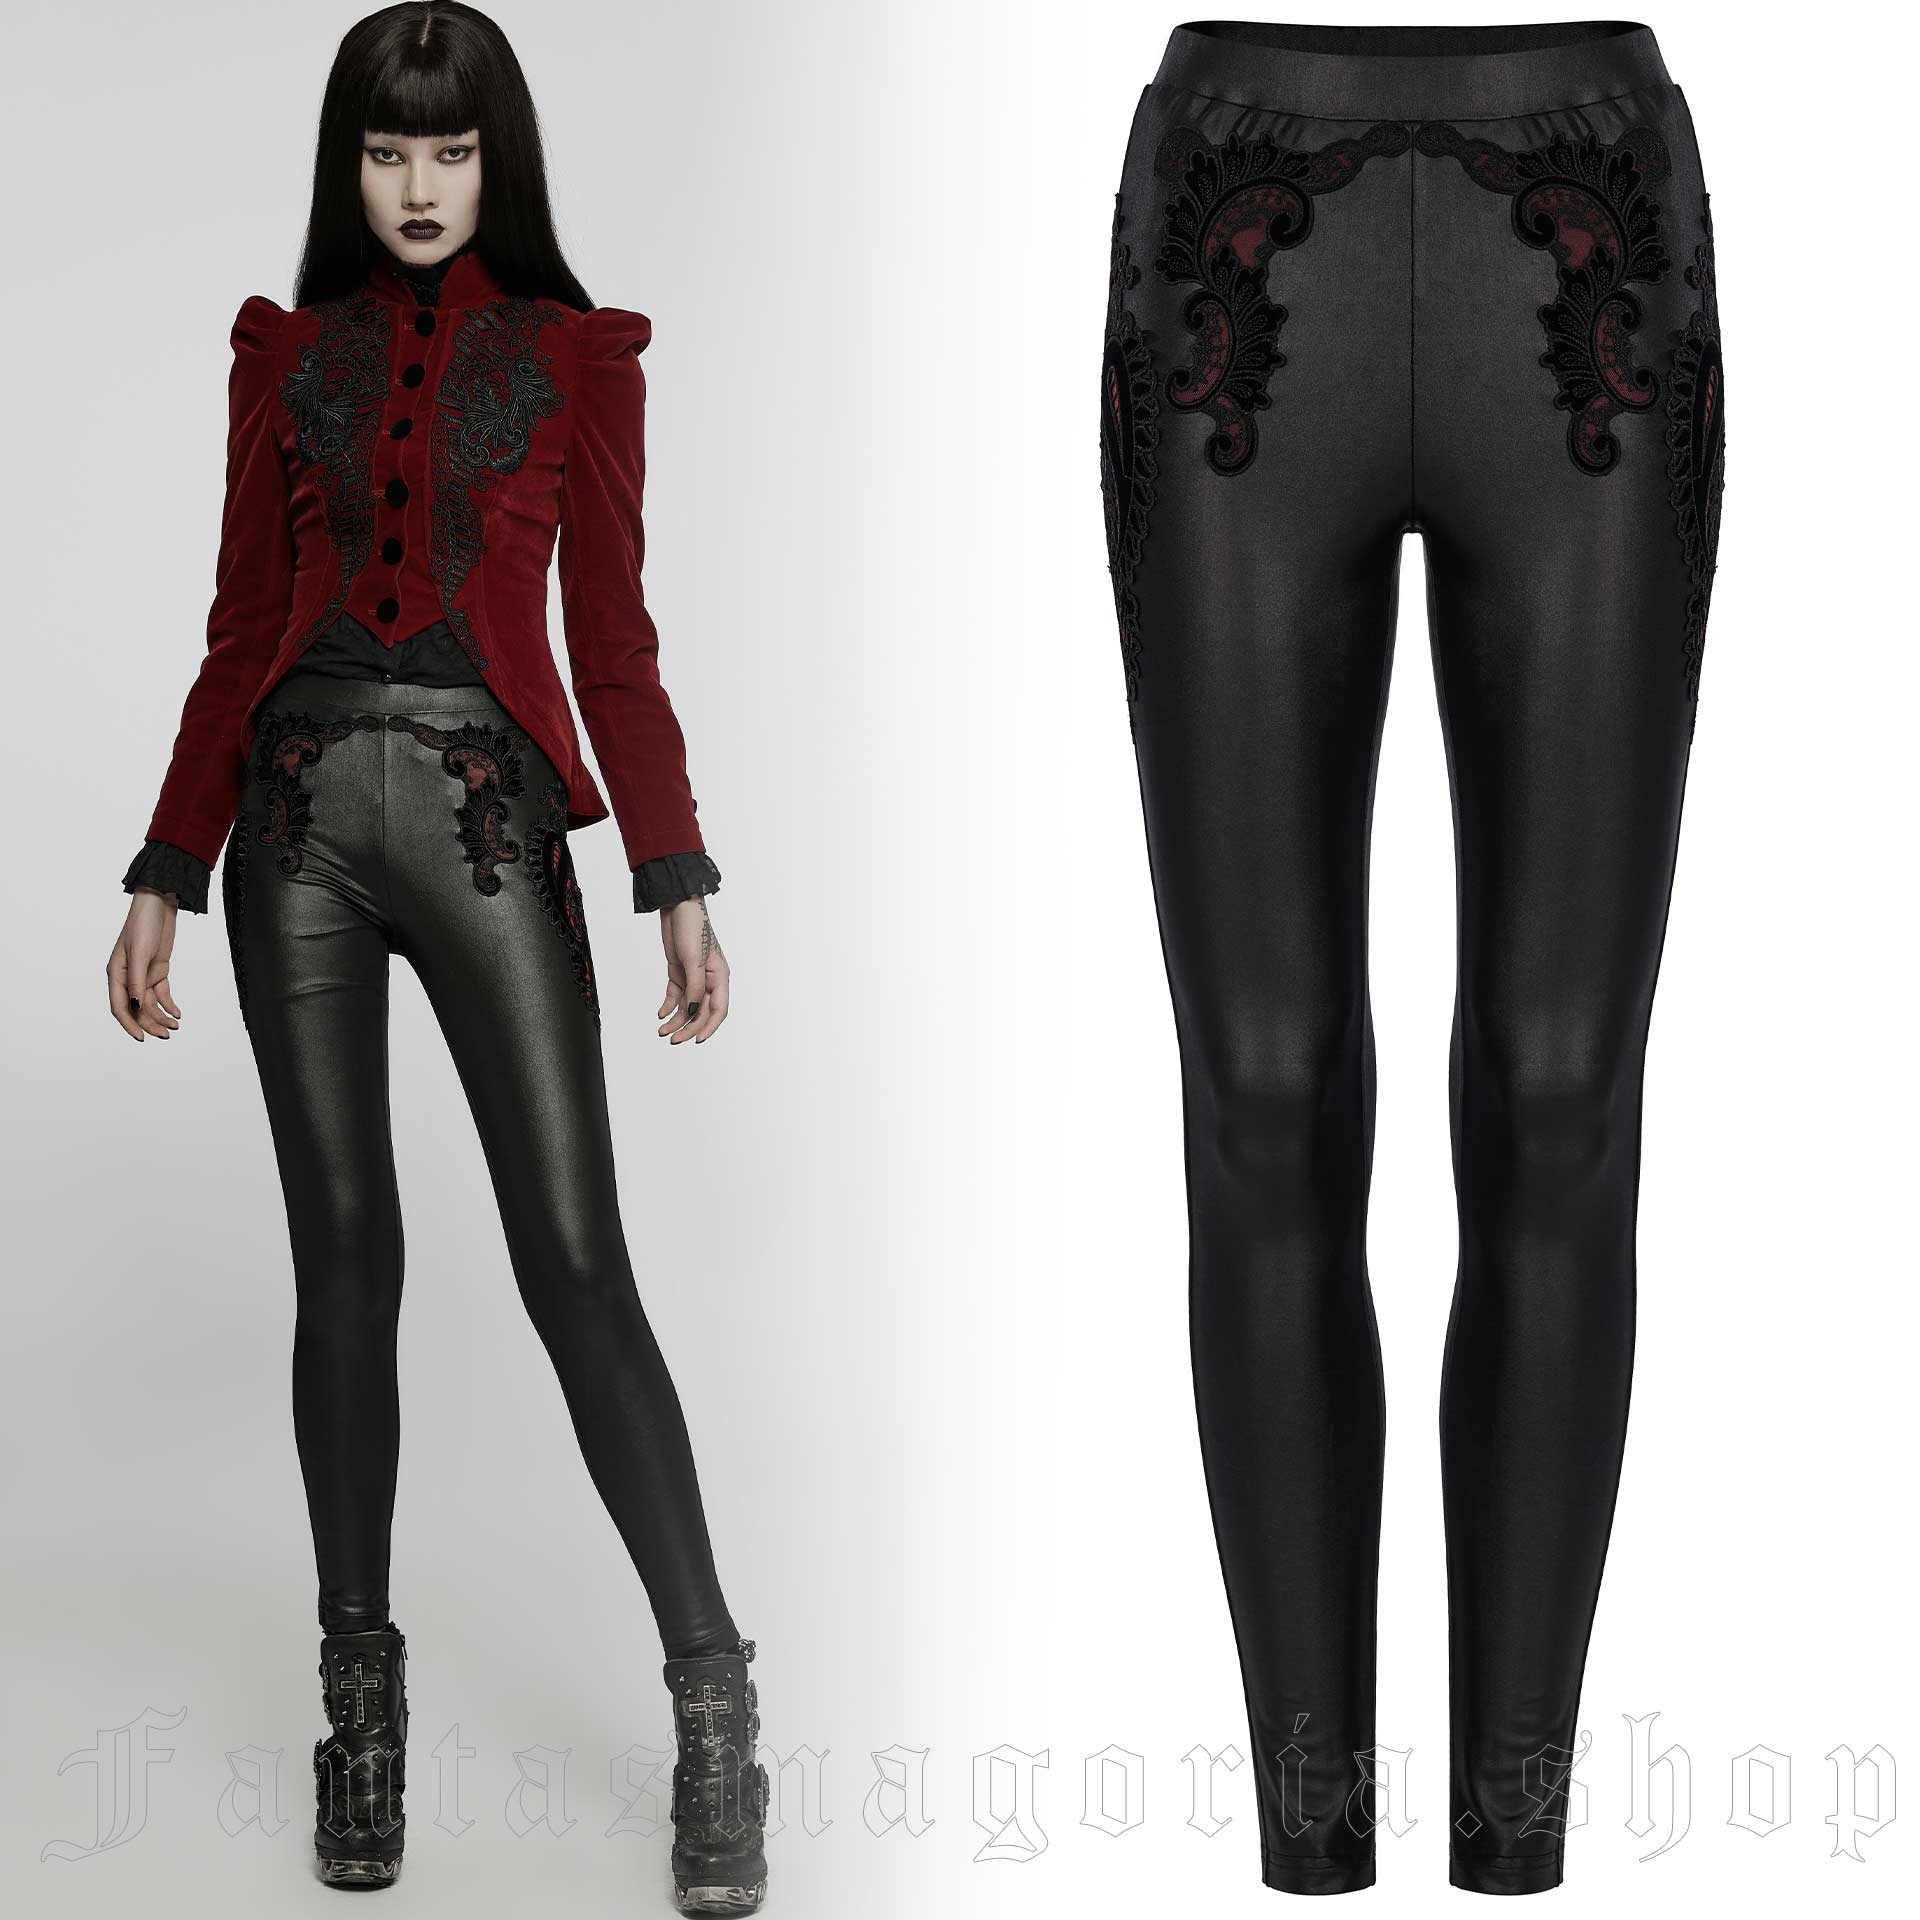 Gothic Pastel Black Skin Tight Elastic Leather Trousers